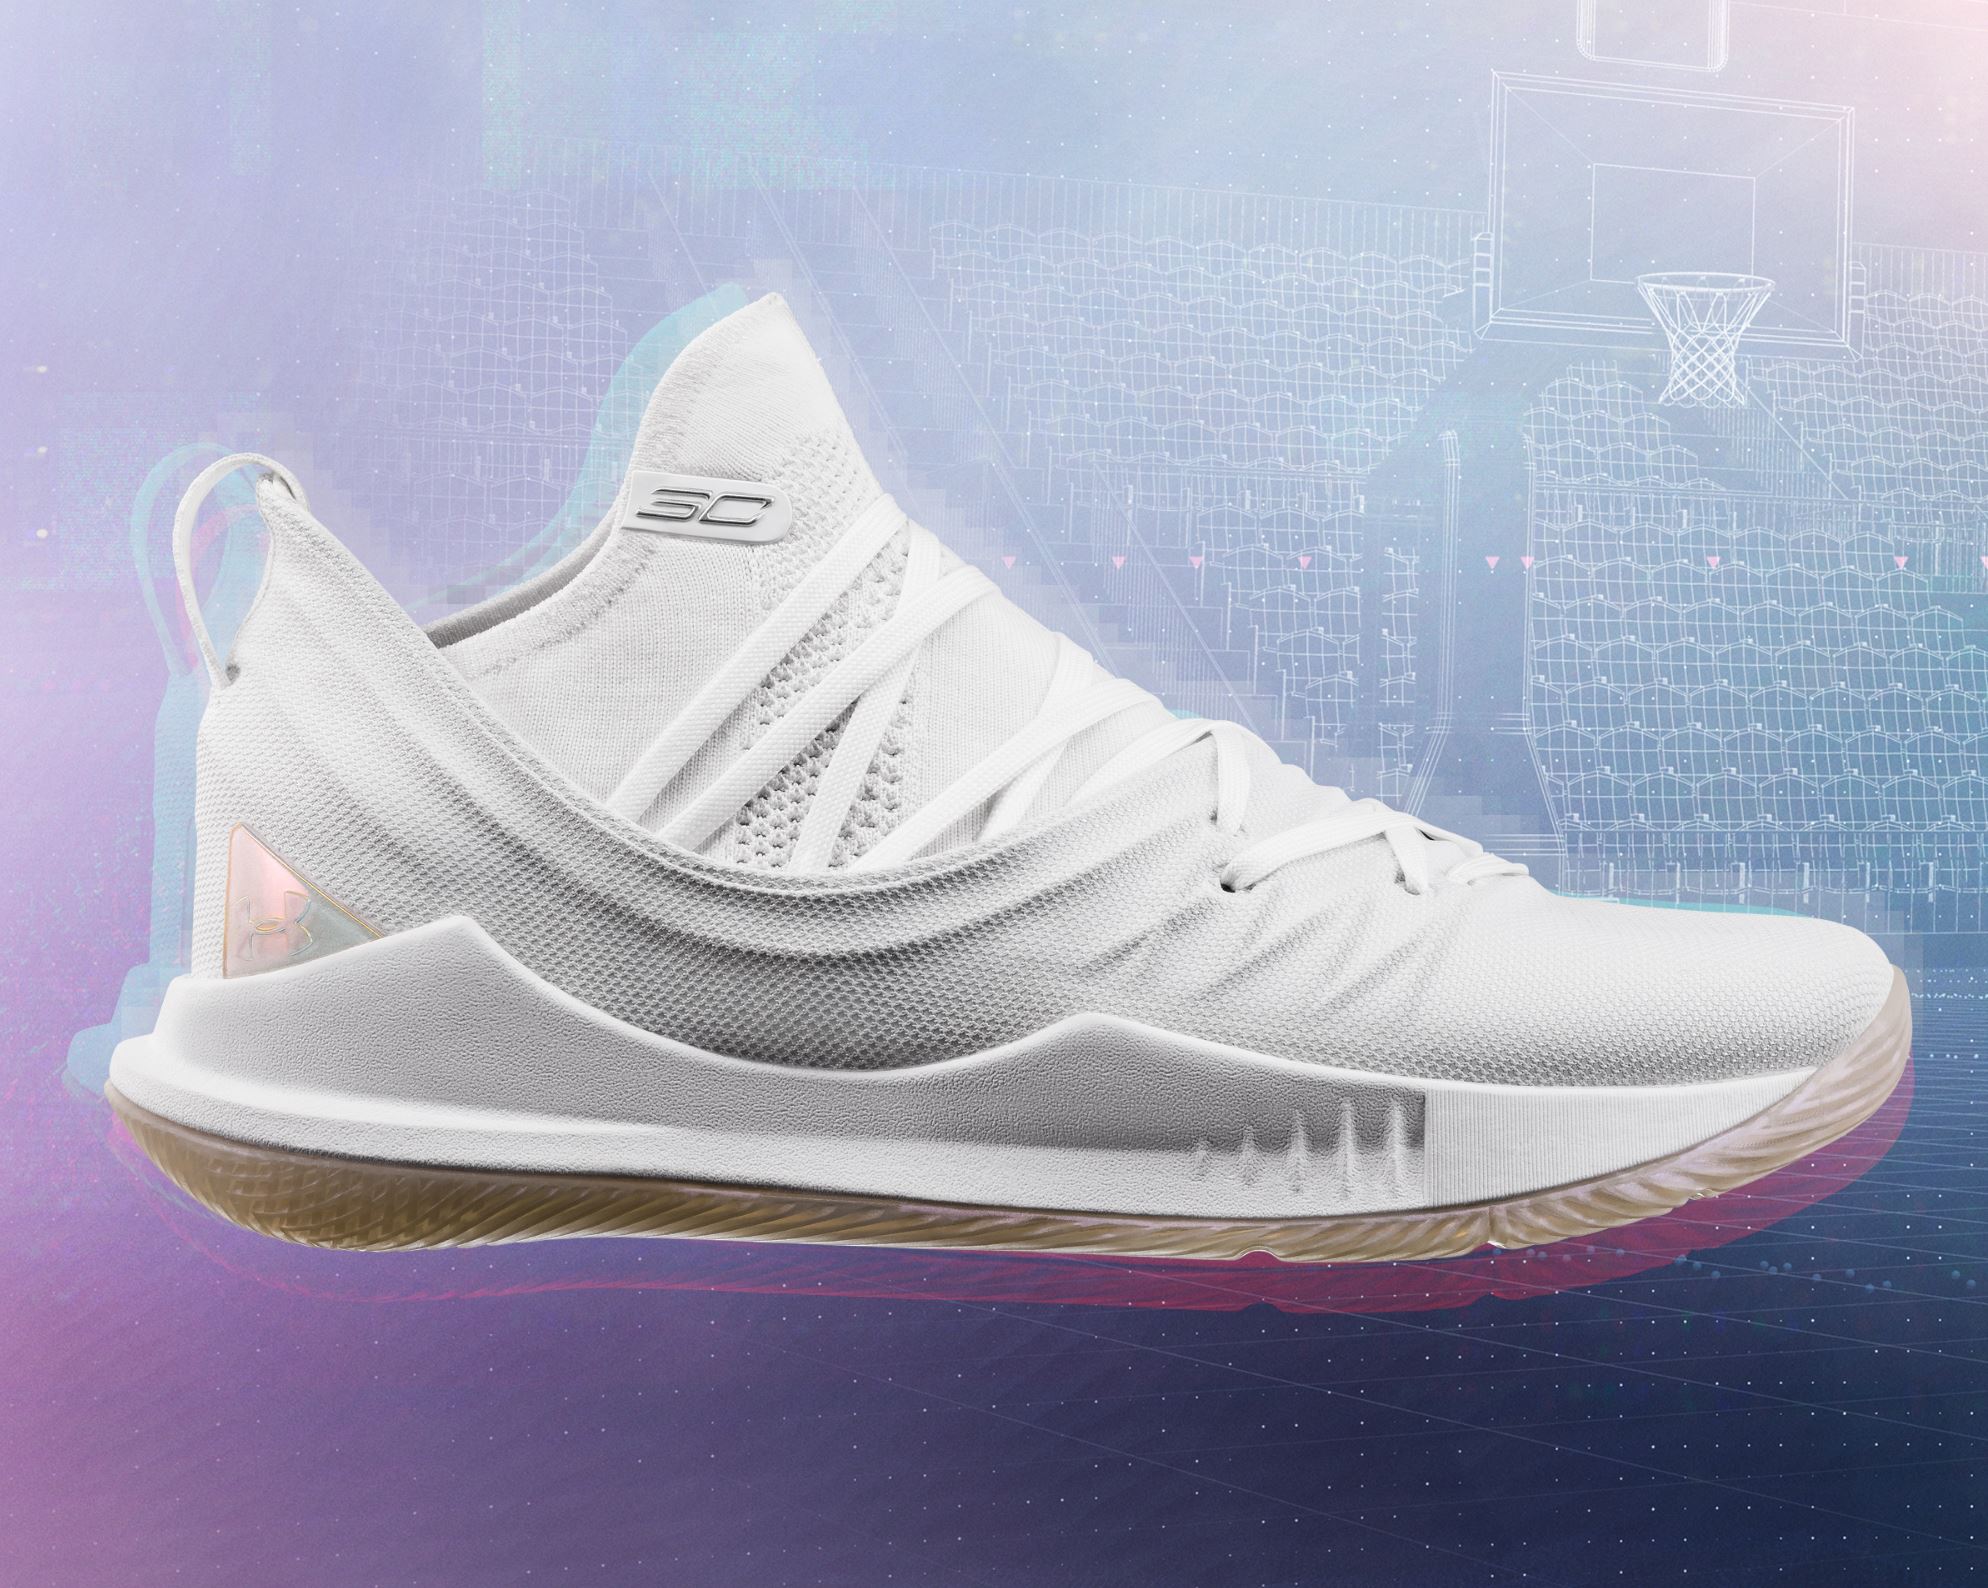 curry 5 triple white - WearTesters